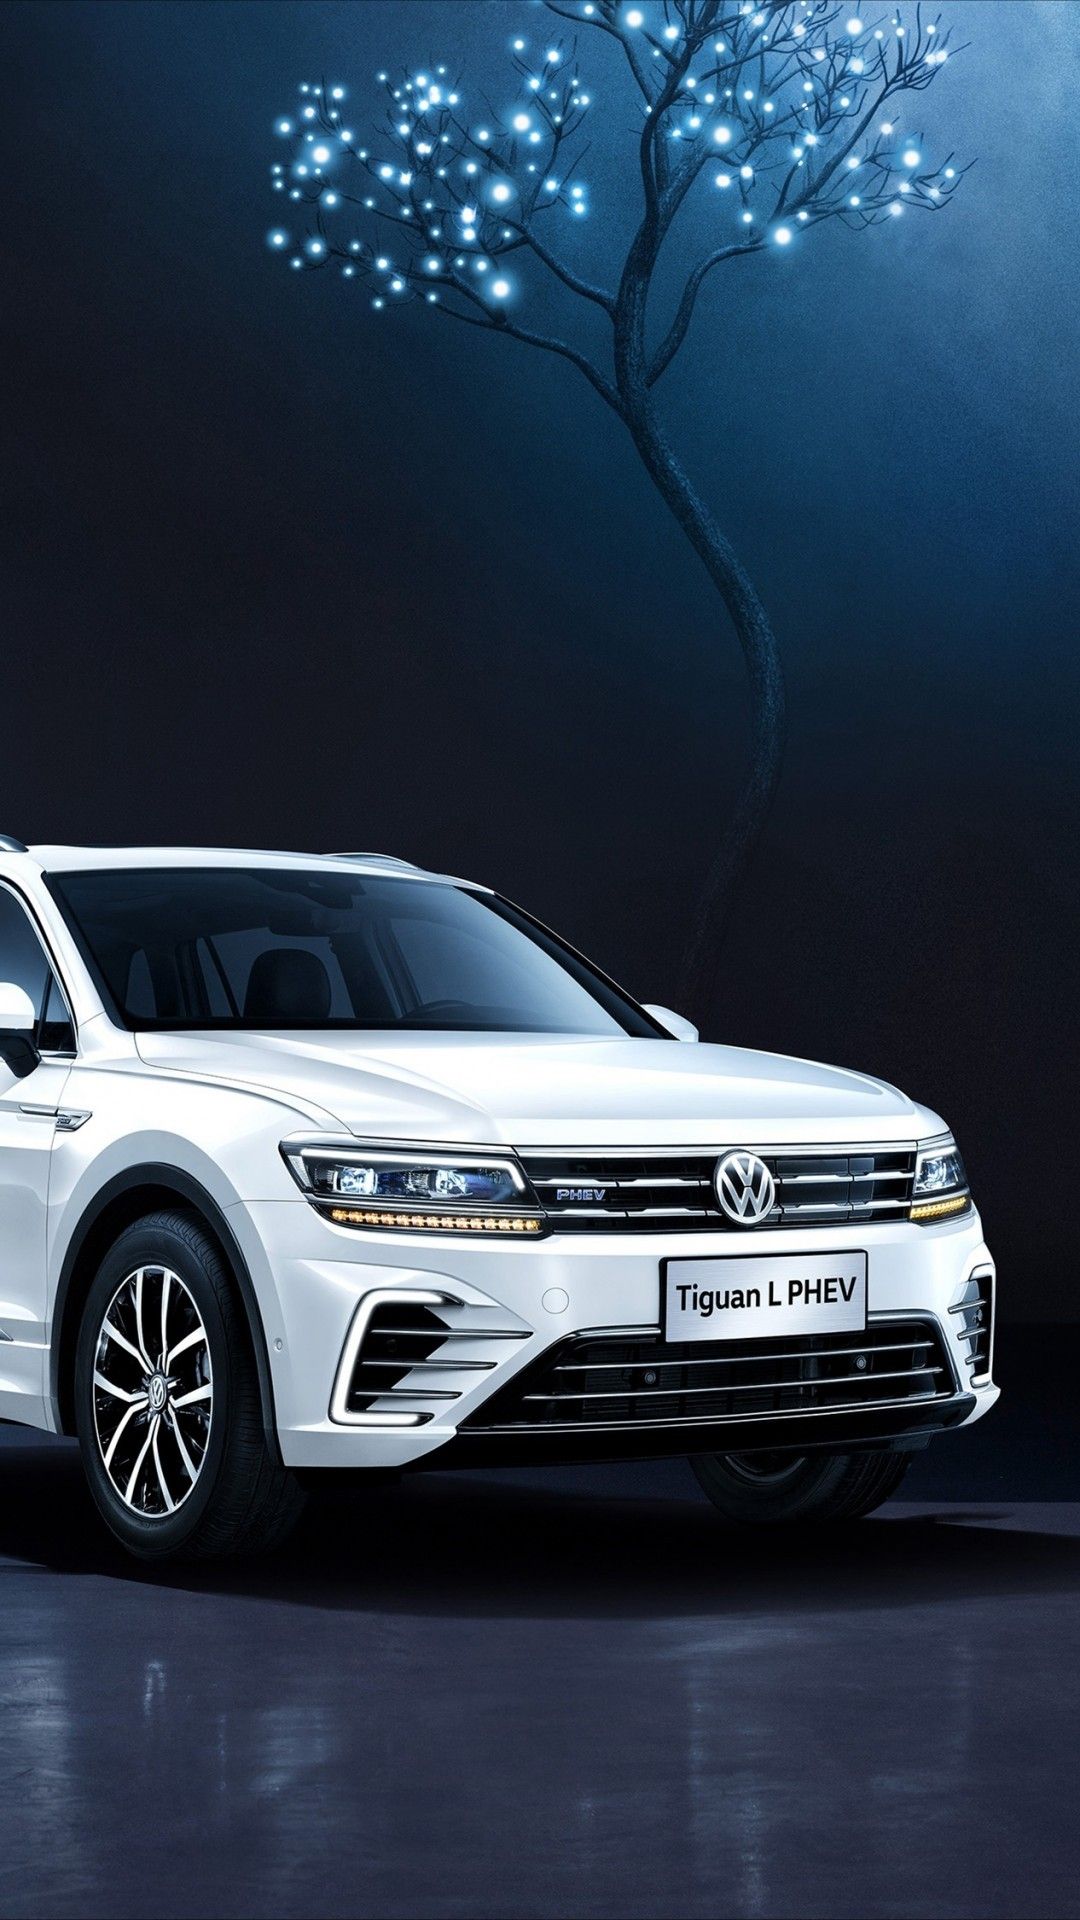 Download 1080x1920 Volkswagen Tiguan, White, Suv Cars Wallpaper for iPhone iPhone 7 Plus, iPhone 6+, Sony Xperia Z, HTC One